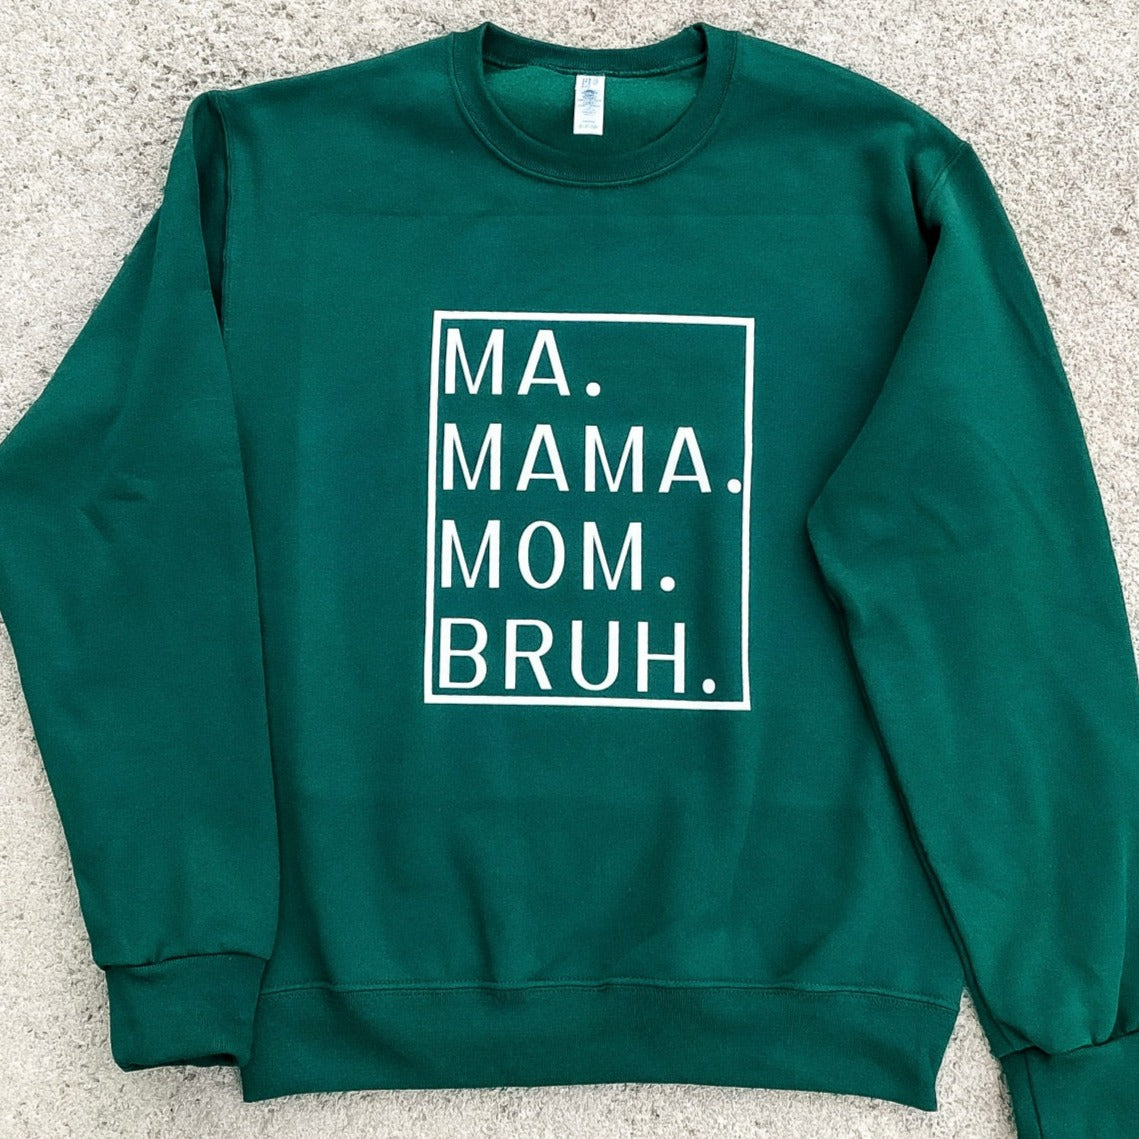 Forest Green Crewneck Sweatshirt with a White Box printed on the Front with Ma. Mama. Mom. Bruh. printed in the box.